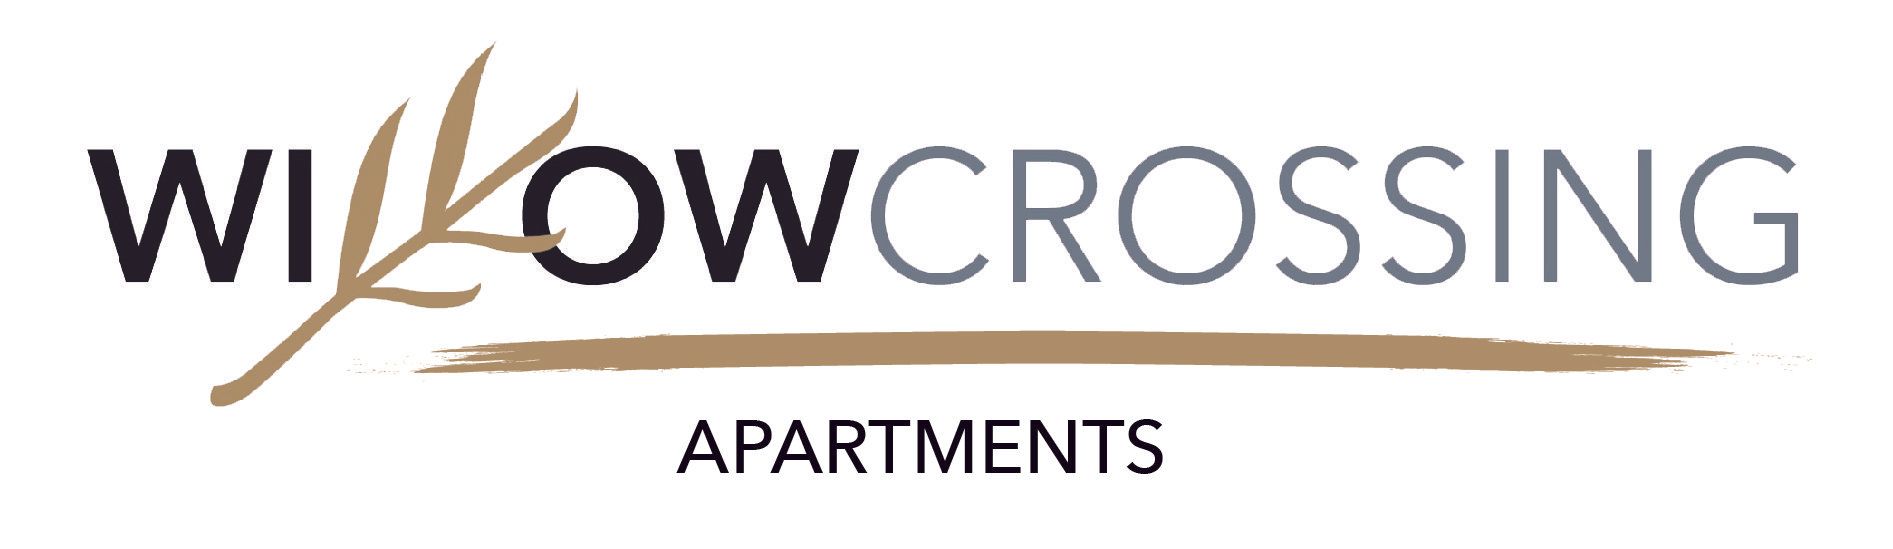 Willow Crossing Apartments logo